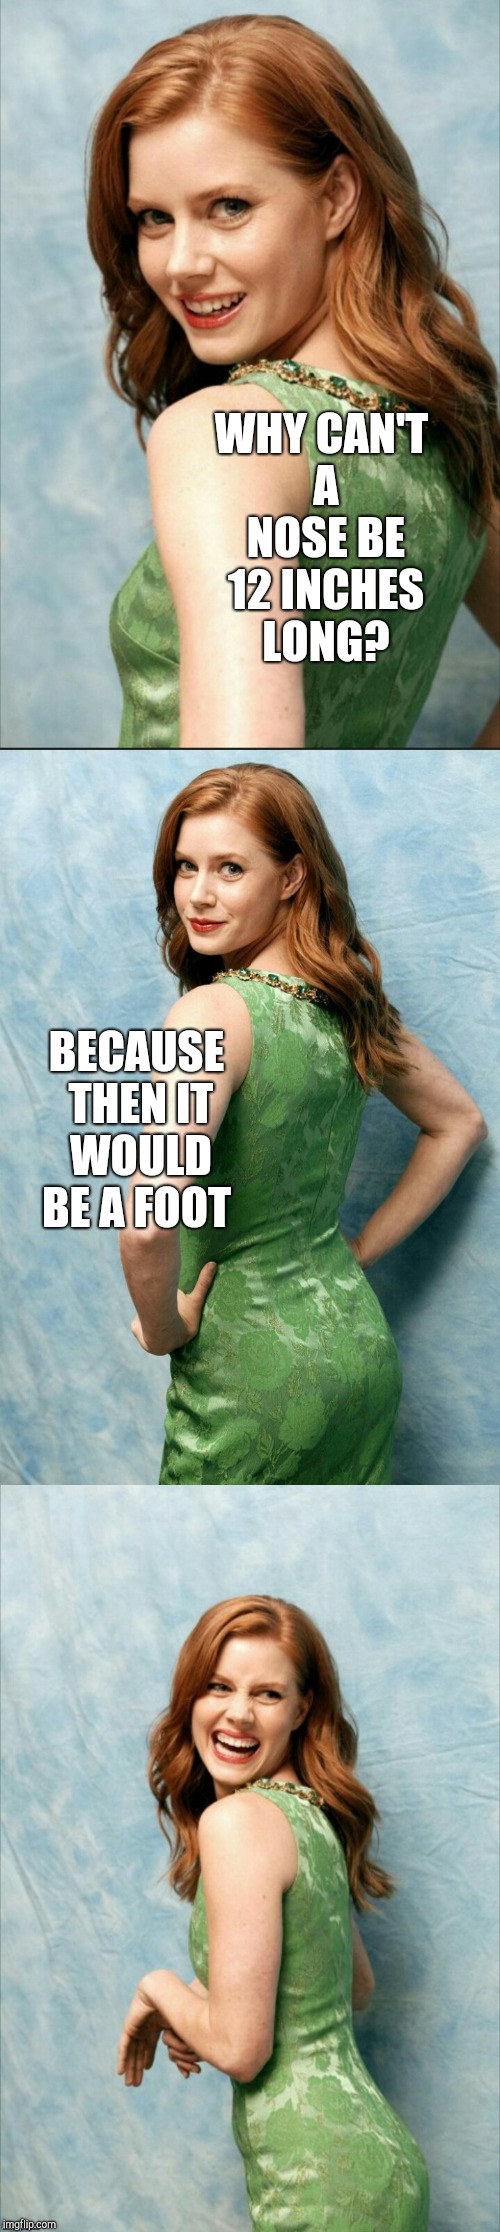 Amy Adams joke template  | WHY CAN'T A NOSE BE 12 INCHES LONG? BECAUSE THEN IT WOULD BE A FOOT | image tagged in amy adams joke template,bad puns,jbmemegeek,amy adams | made w/ Imgflip meme maker